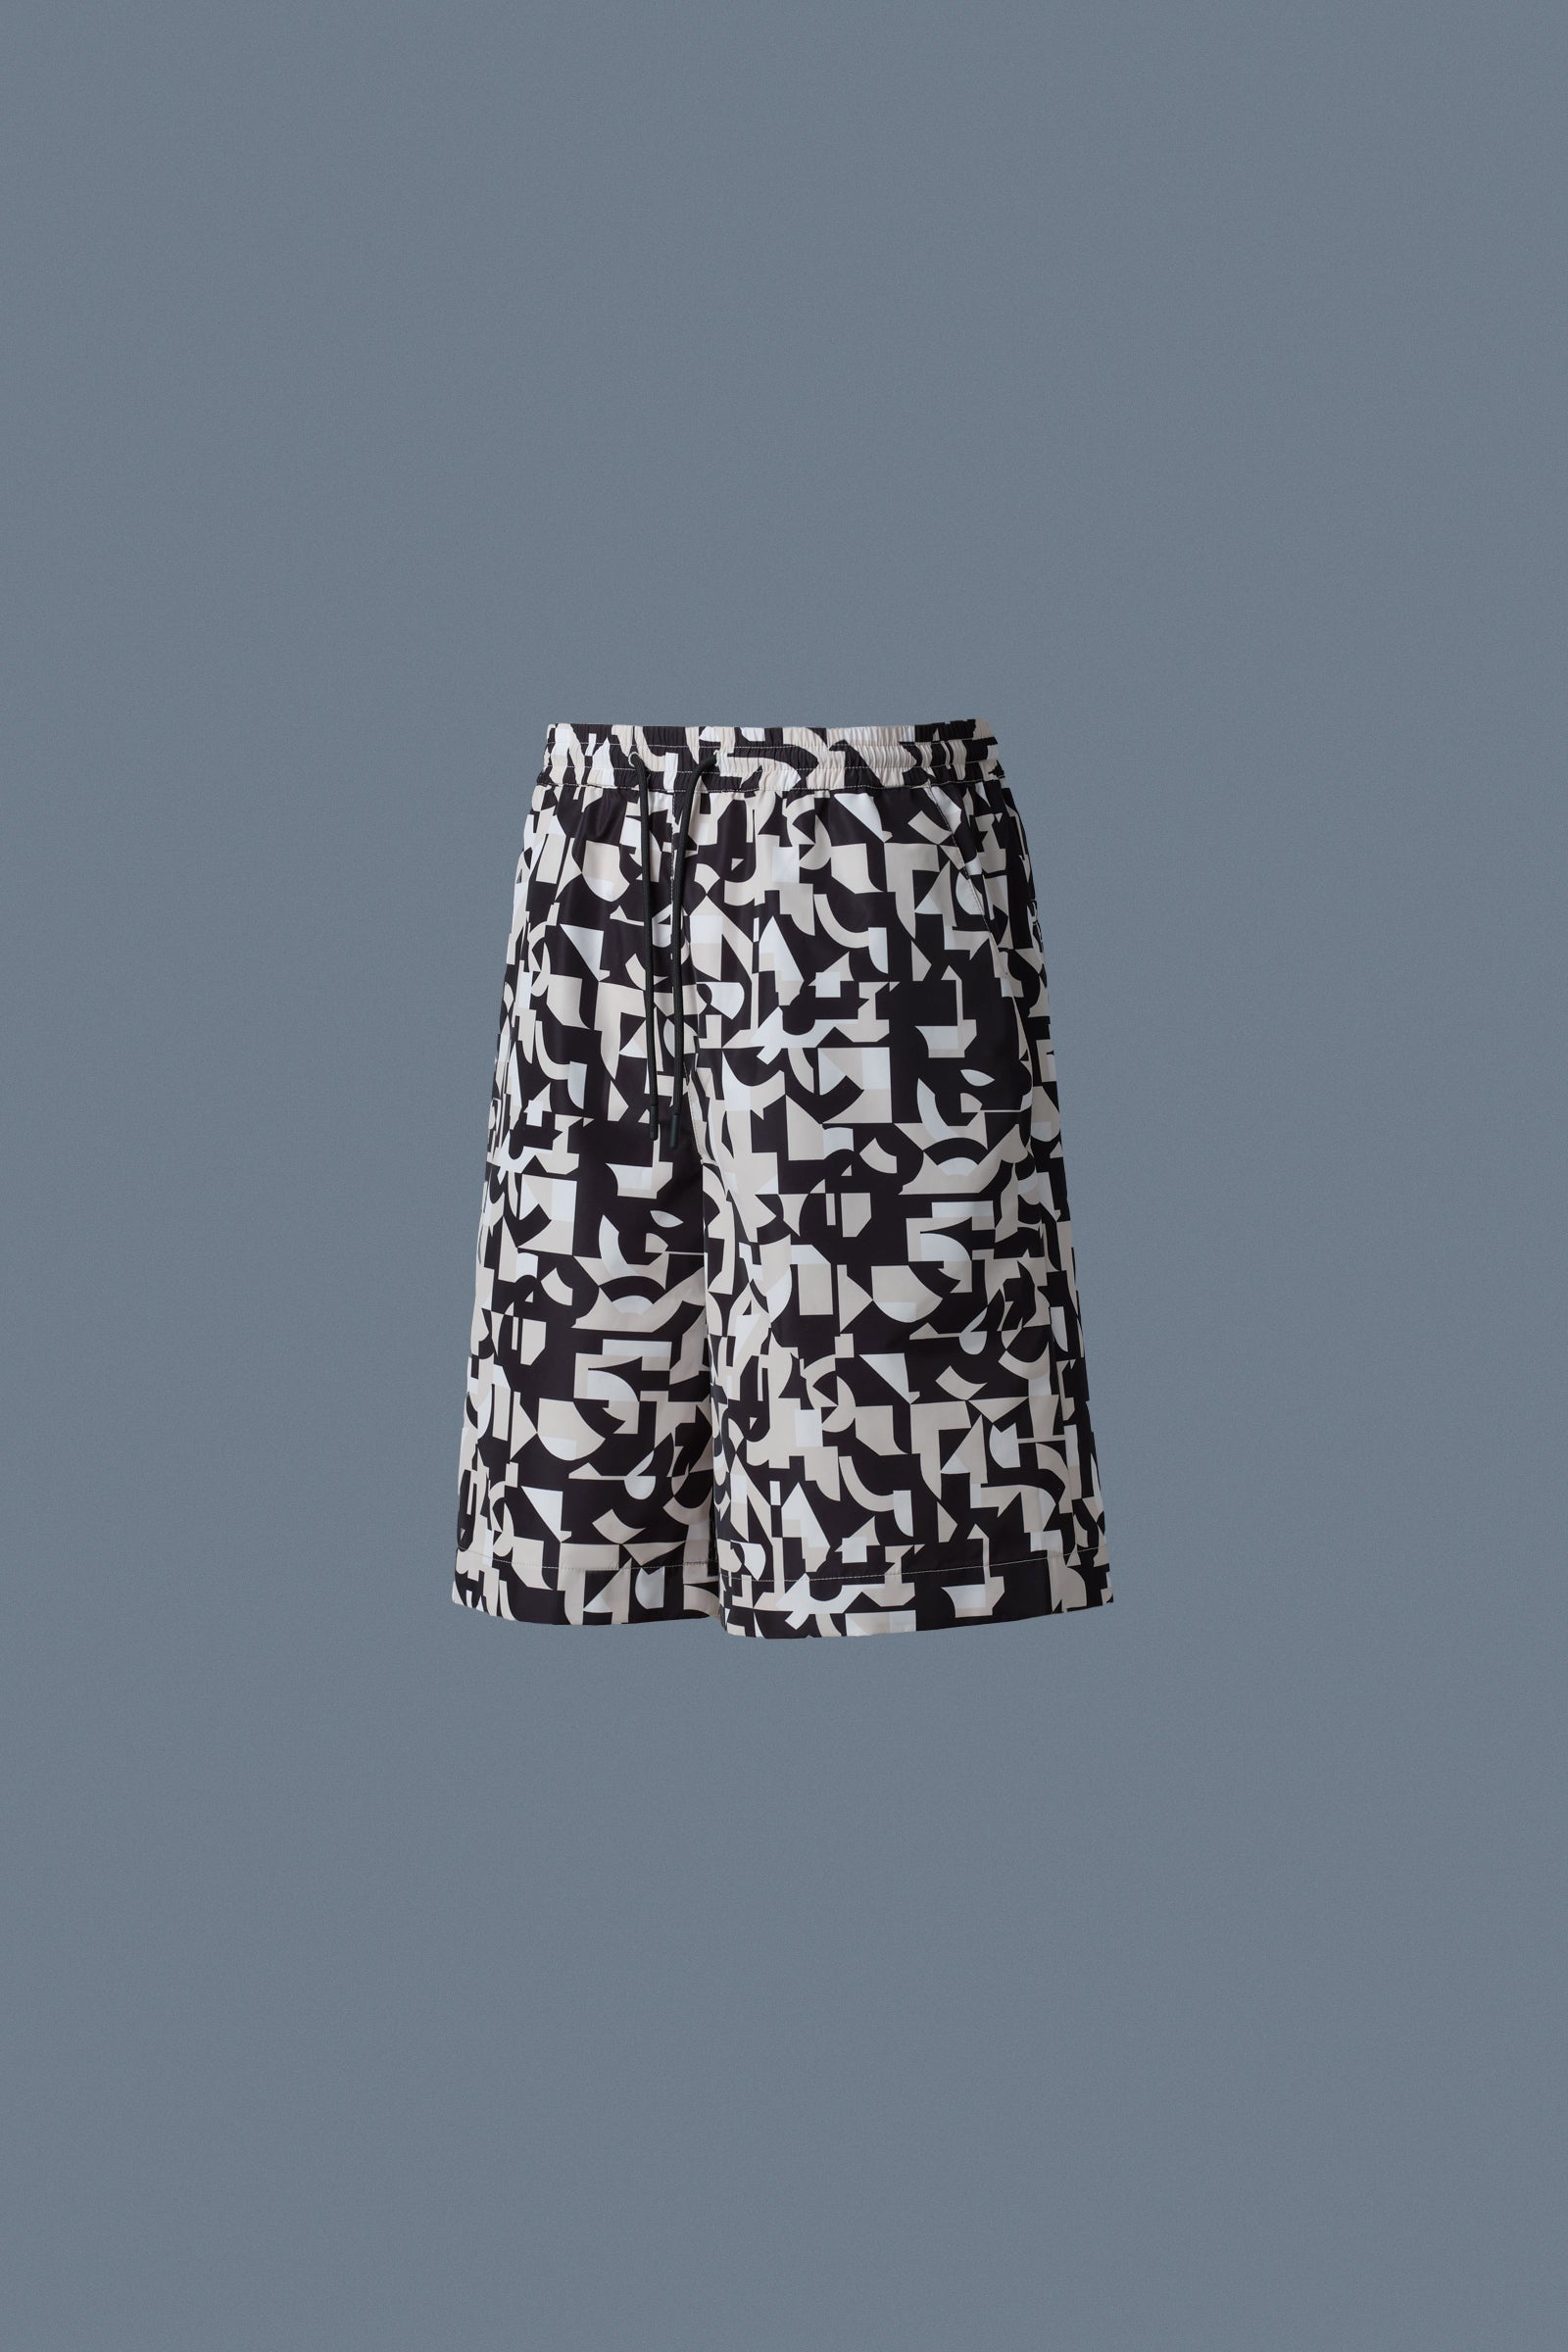 DANTE Abstract Geometric Recycled Shorts - 1